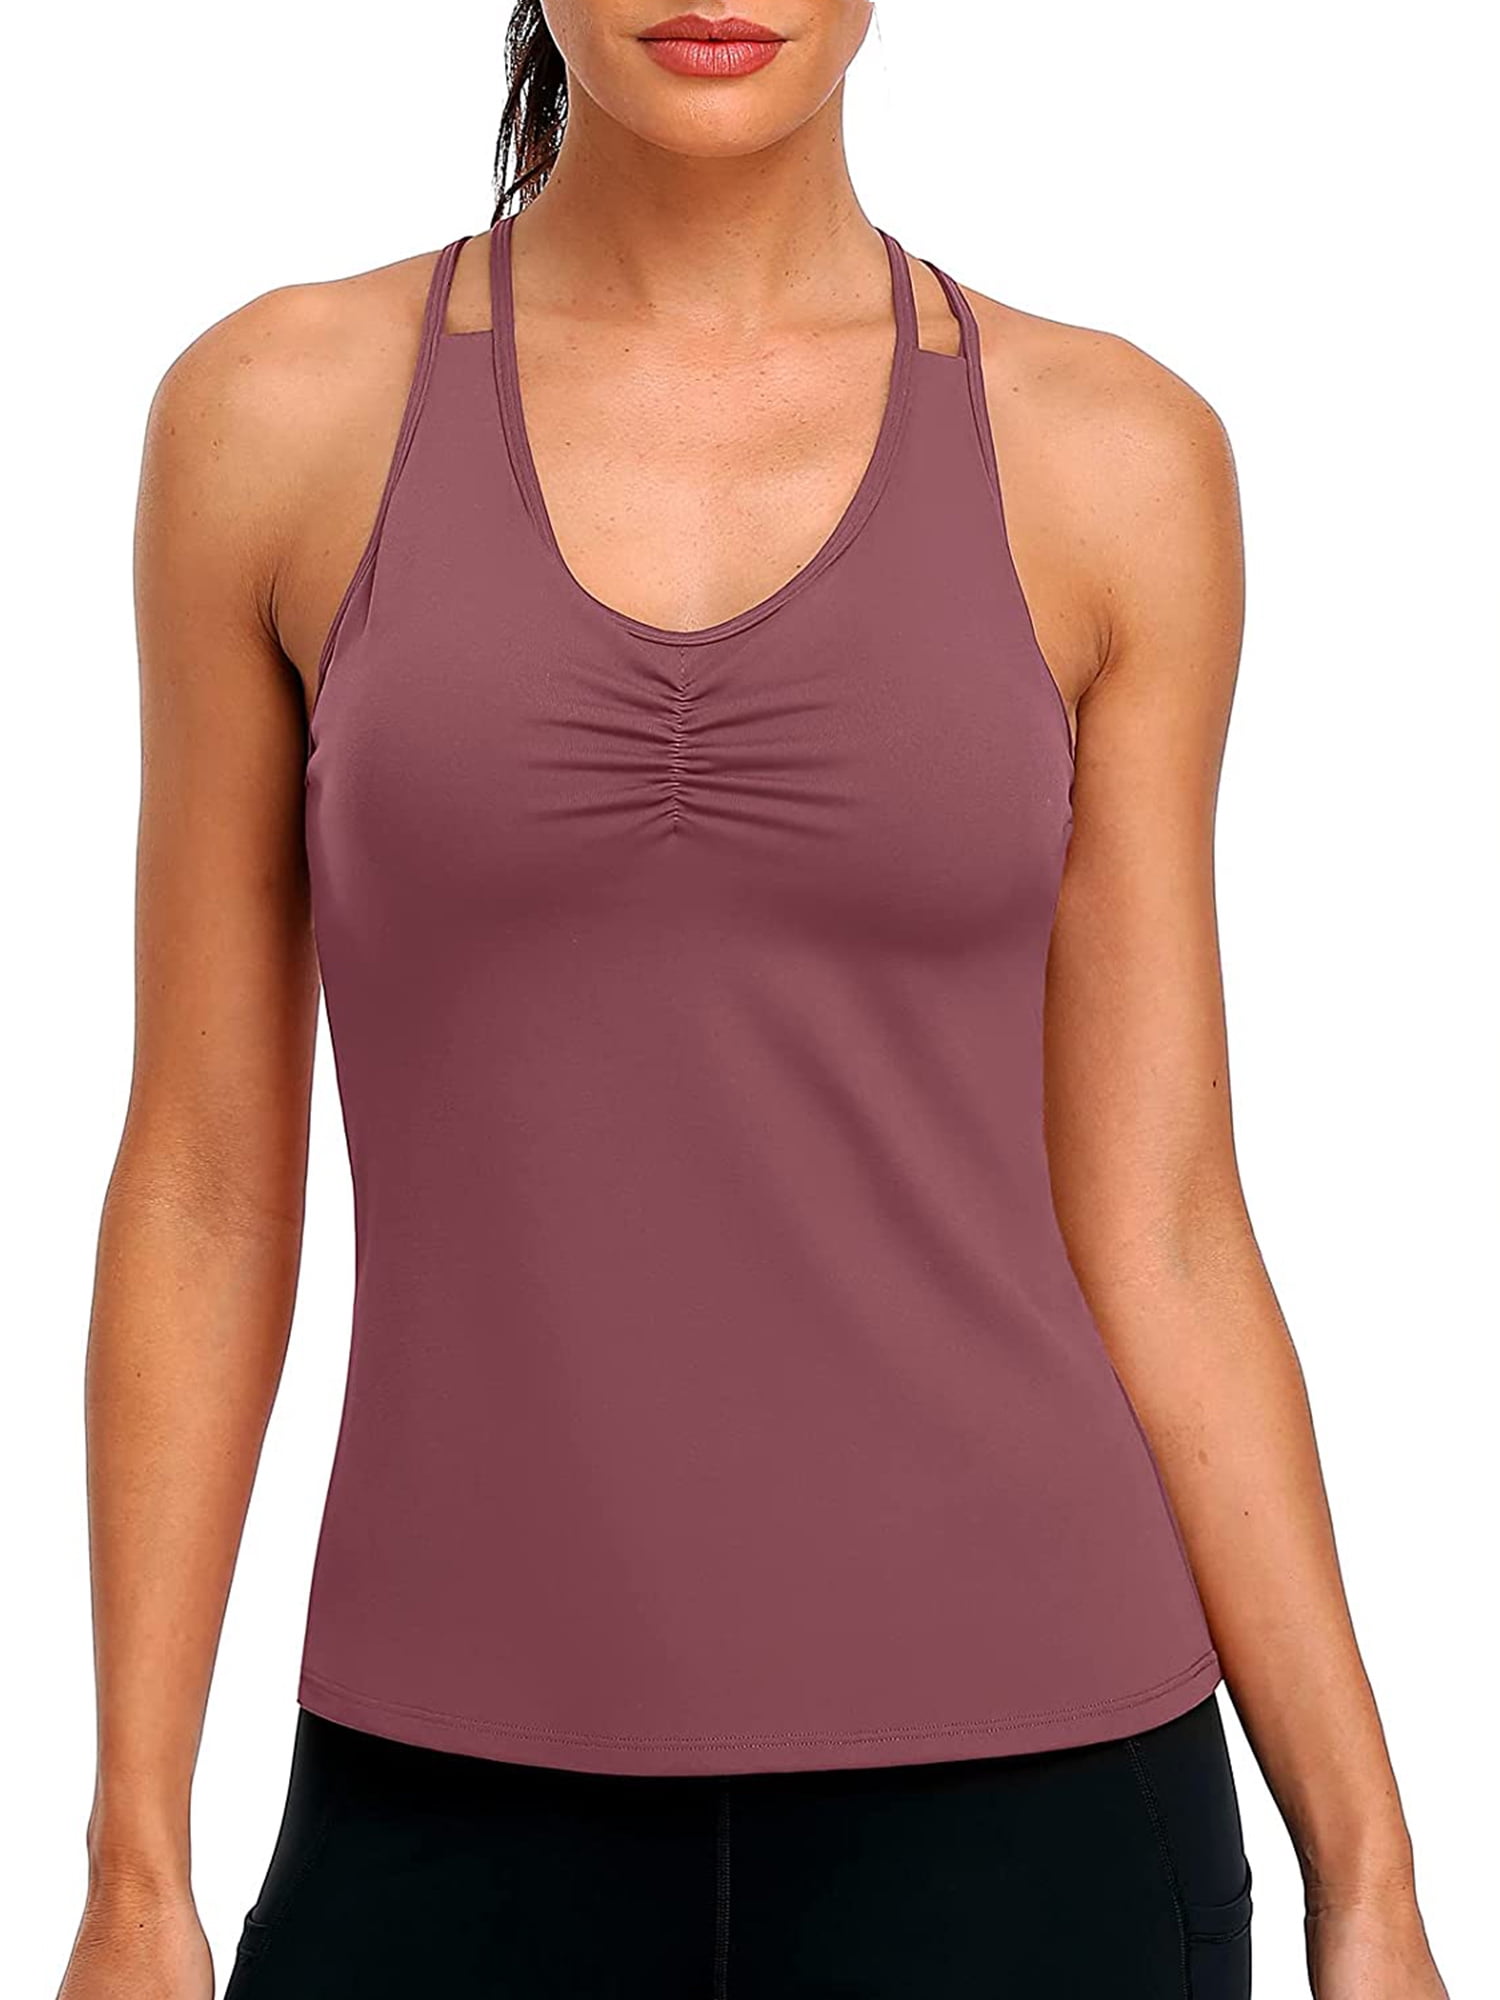 Sociala V Neck Two Cross Straps Ruched Yoga Tank Top With Shelf